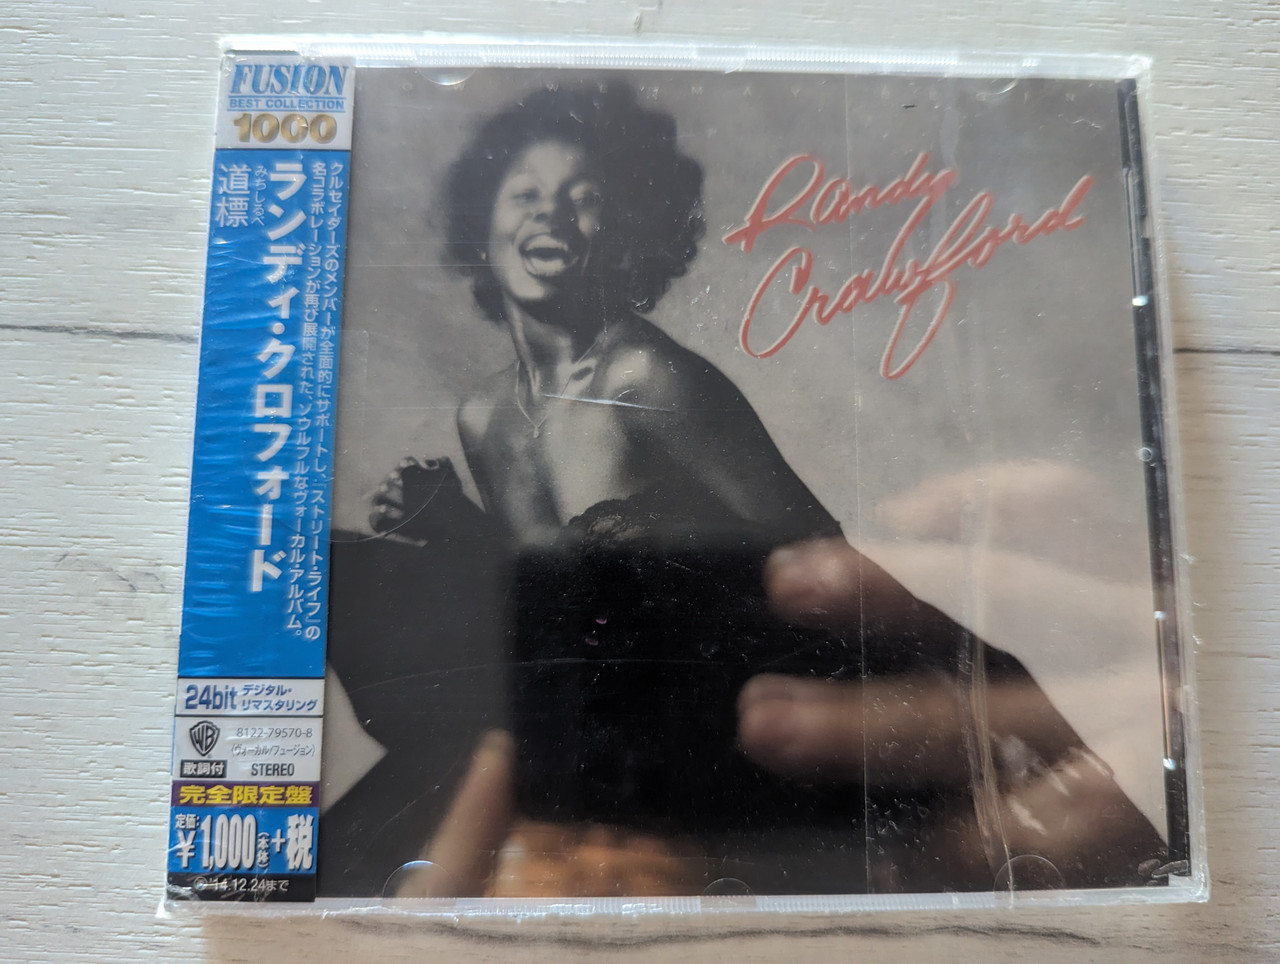 https://cdn10.bigcommerce.com/s-62bdpkt7pb/products/0/images/314135/Randy_Crawford_Now_We_May_Begin_Fusion_Best_Collection_1000_Rhino_Records_Audio_CD_2014_Stereo_8122-79570-8_1__42046.1701322359.1280.1280.jpg?c=2